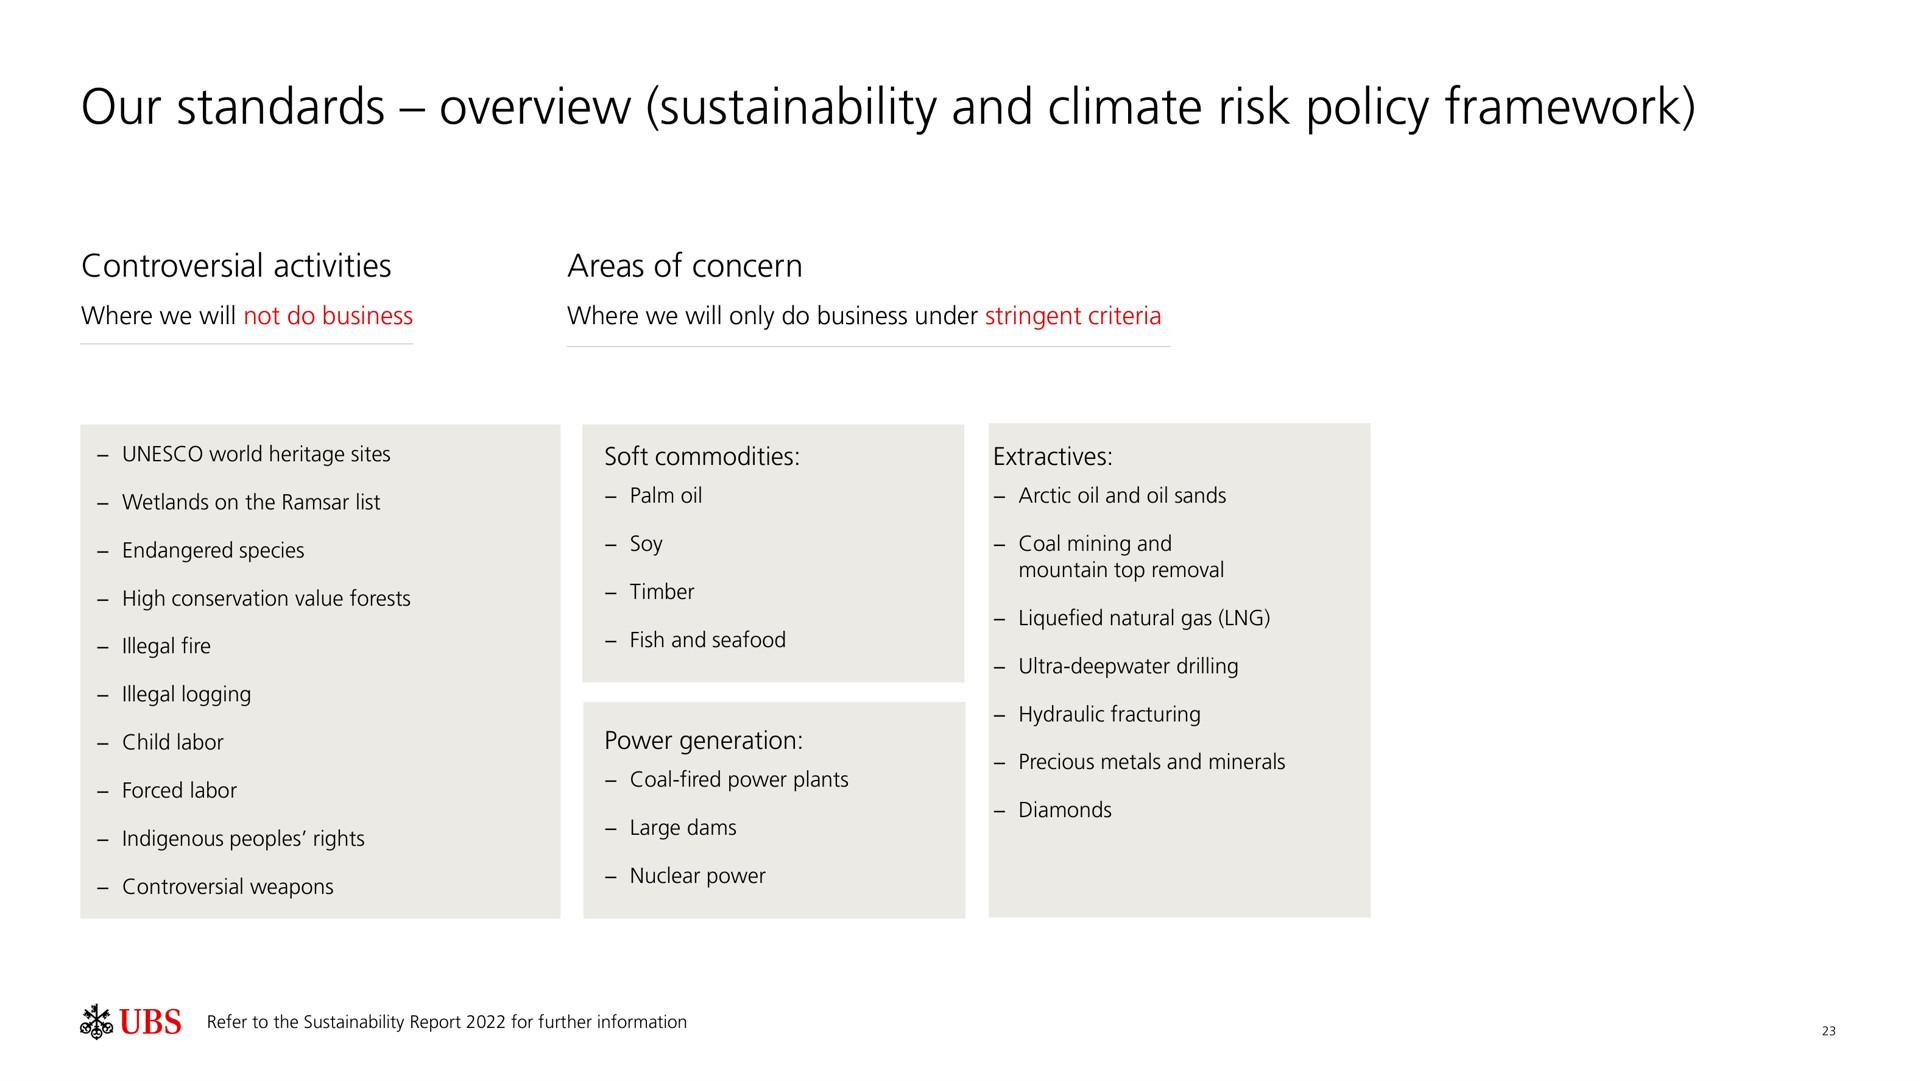 our standards overview and climate risk policy framework controversial activities areas of concern | UBS